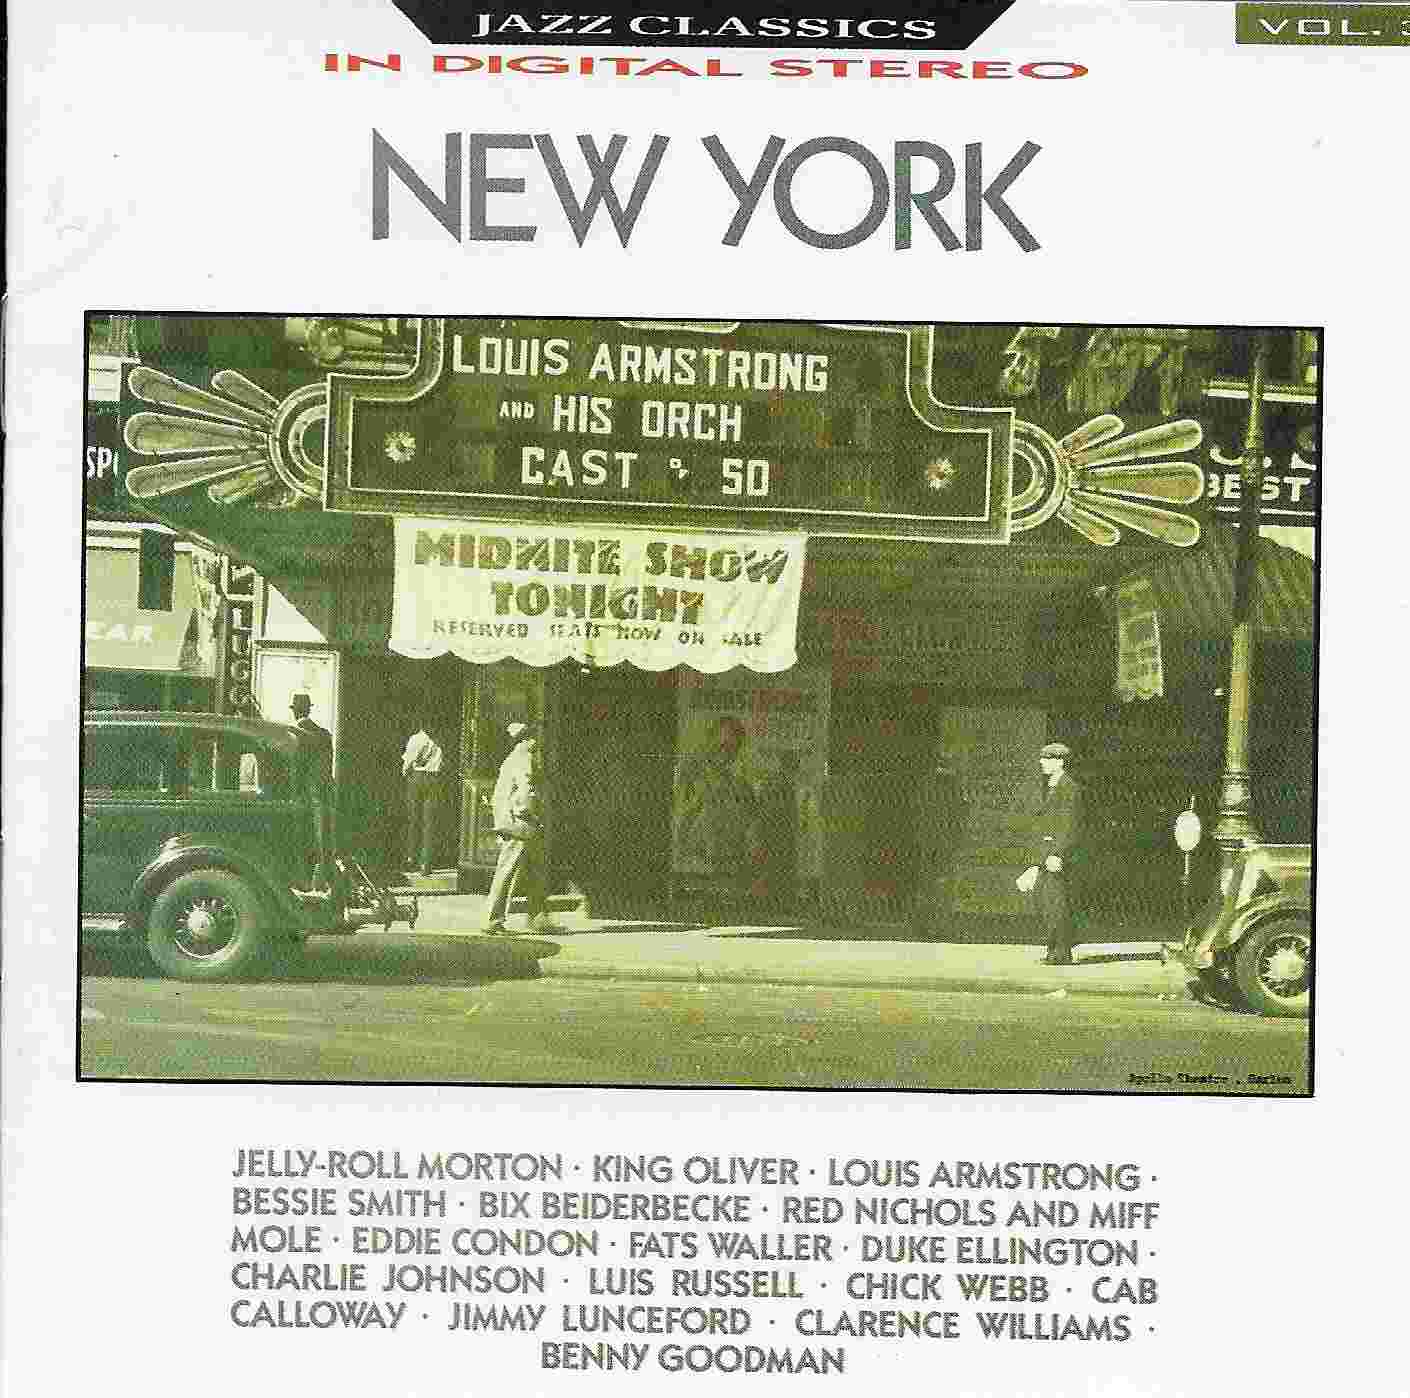 Picture of BBCCD590 Jazz Classics - Volume 3, New York CD by artist Various from the BBC records and Tapes library